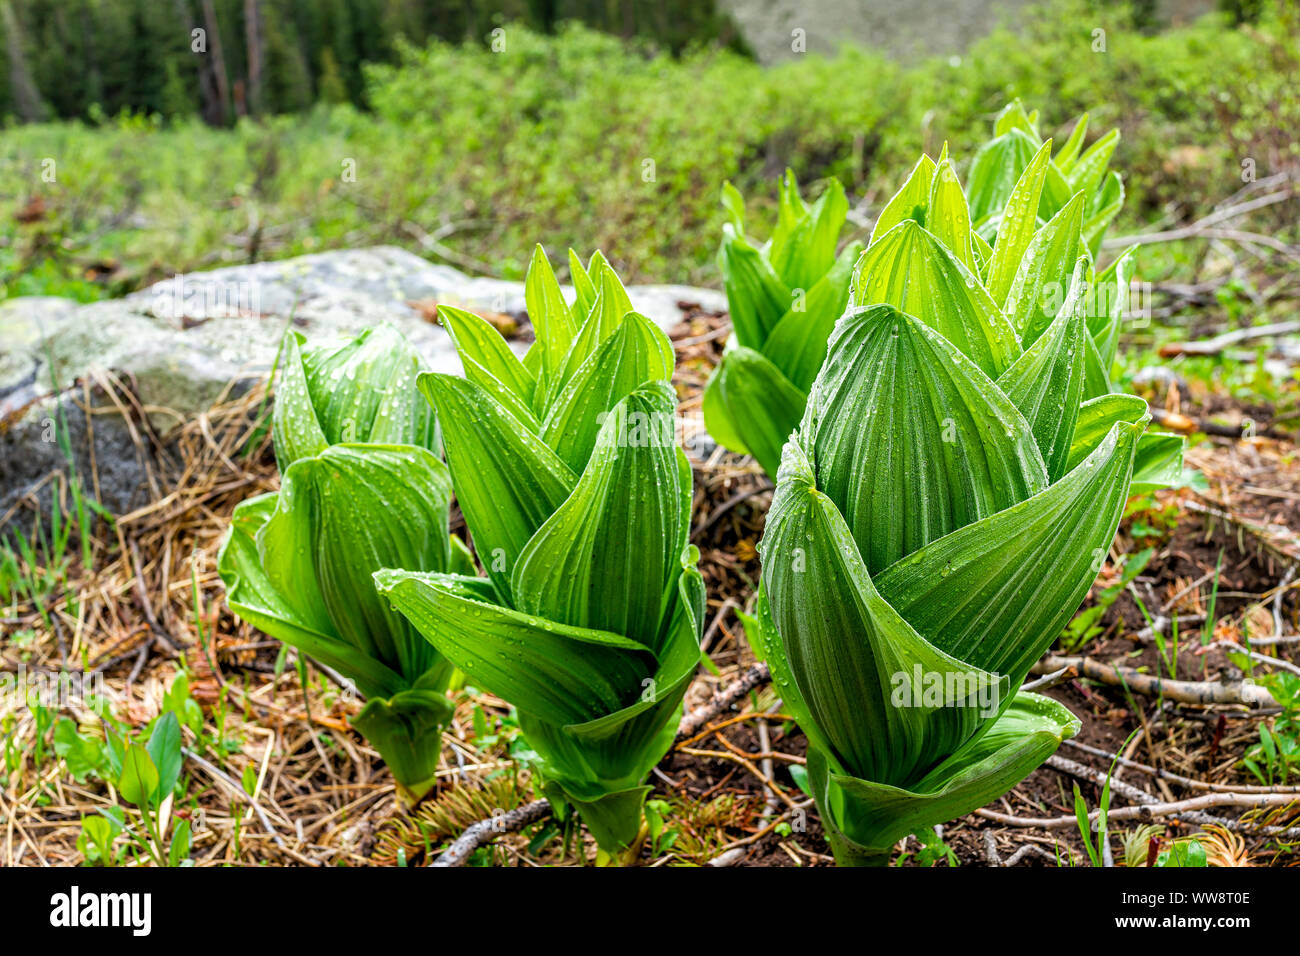 Yellow lady's slipper plants on Conundrum Creek Trail in Aspen, Colorado in 2019 summer Stock Photo